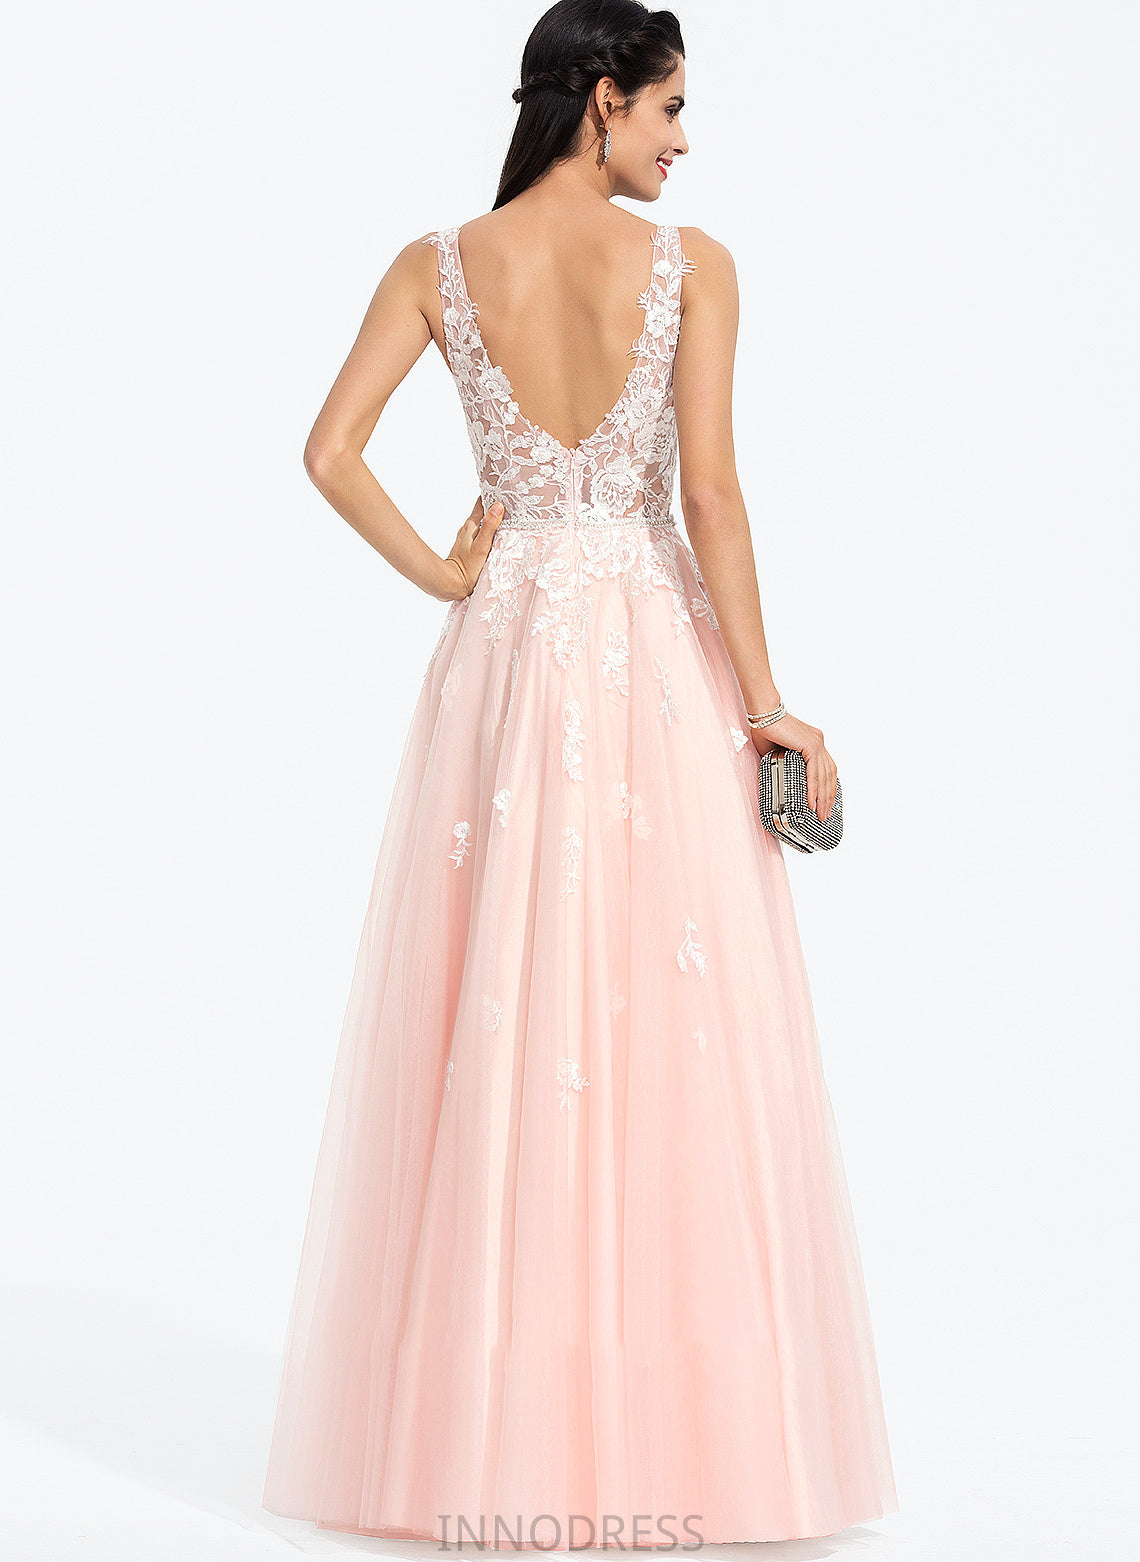 V-neck Prom Dresses Floor-Length Tulle With Beading Marlie Sequins Ball-Gown/Princess